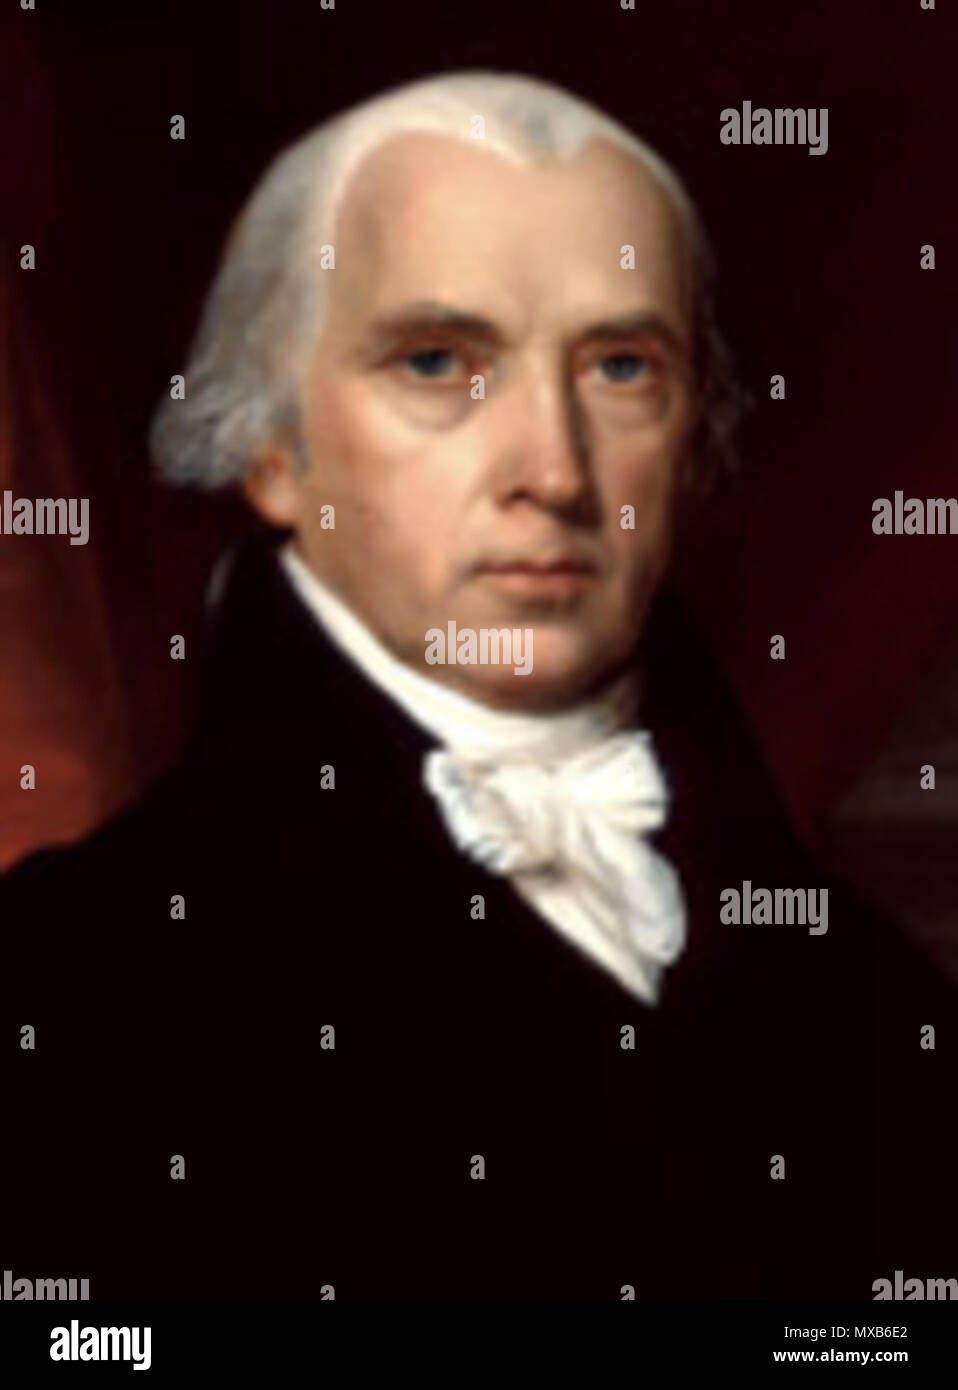 . Portrait of James Madison, one of the authors of the Federalist Papers, and the fourth President of the United States Medium/Support: oil on canvas Measurements: 26 x 22 3/16 in (66 x 56.4 cm) Scholar's Notes: 'The portrait [of James Madison] was commissioned . . by James Monroe . . Cameo-like, with firm planes and carefully controlled range of values, it does not rely on deep shadow or strong contrast for its sculptural effect, but works mostly in light tones. The face, despite its impassivity, reveals the toll exacted by the War of 1812 . . It is set above a high-collared black coat betwee Stock Photo